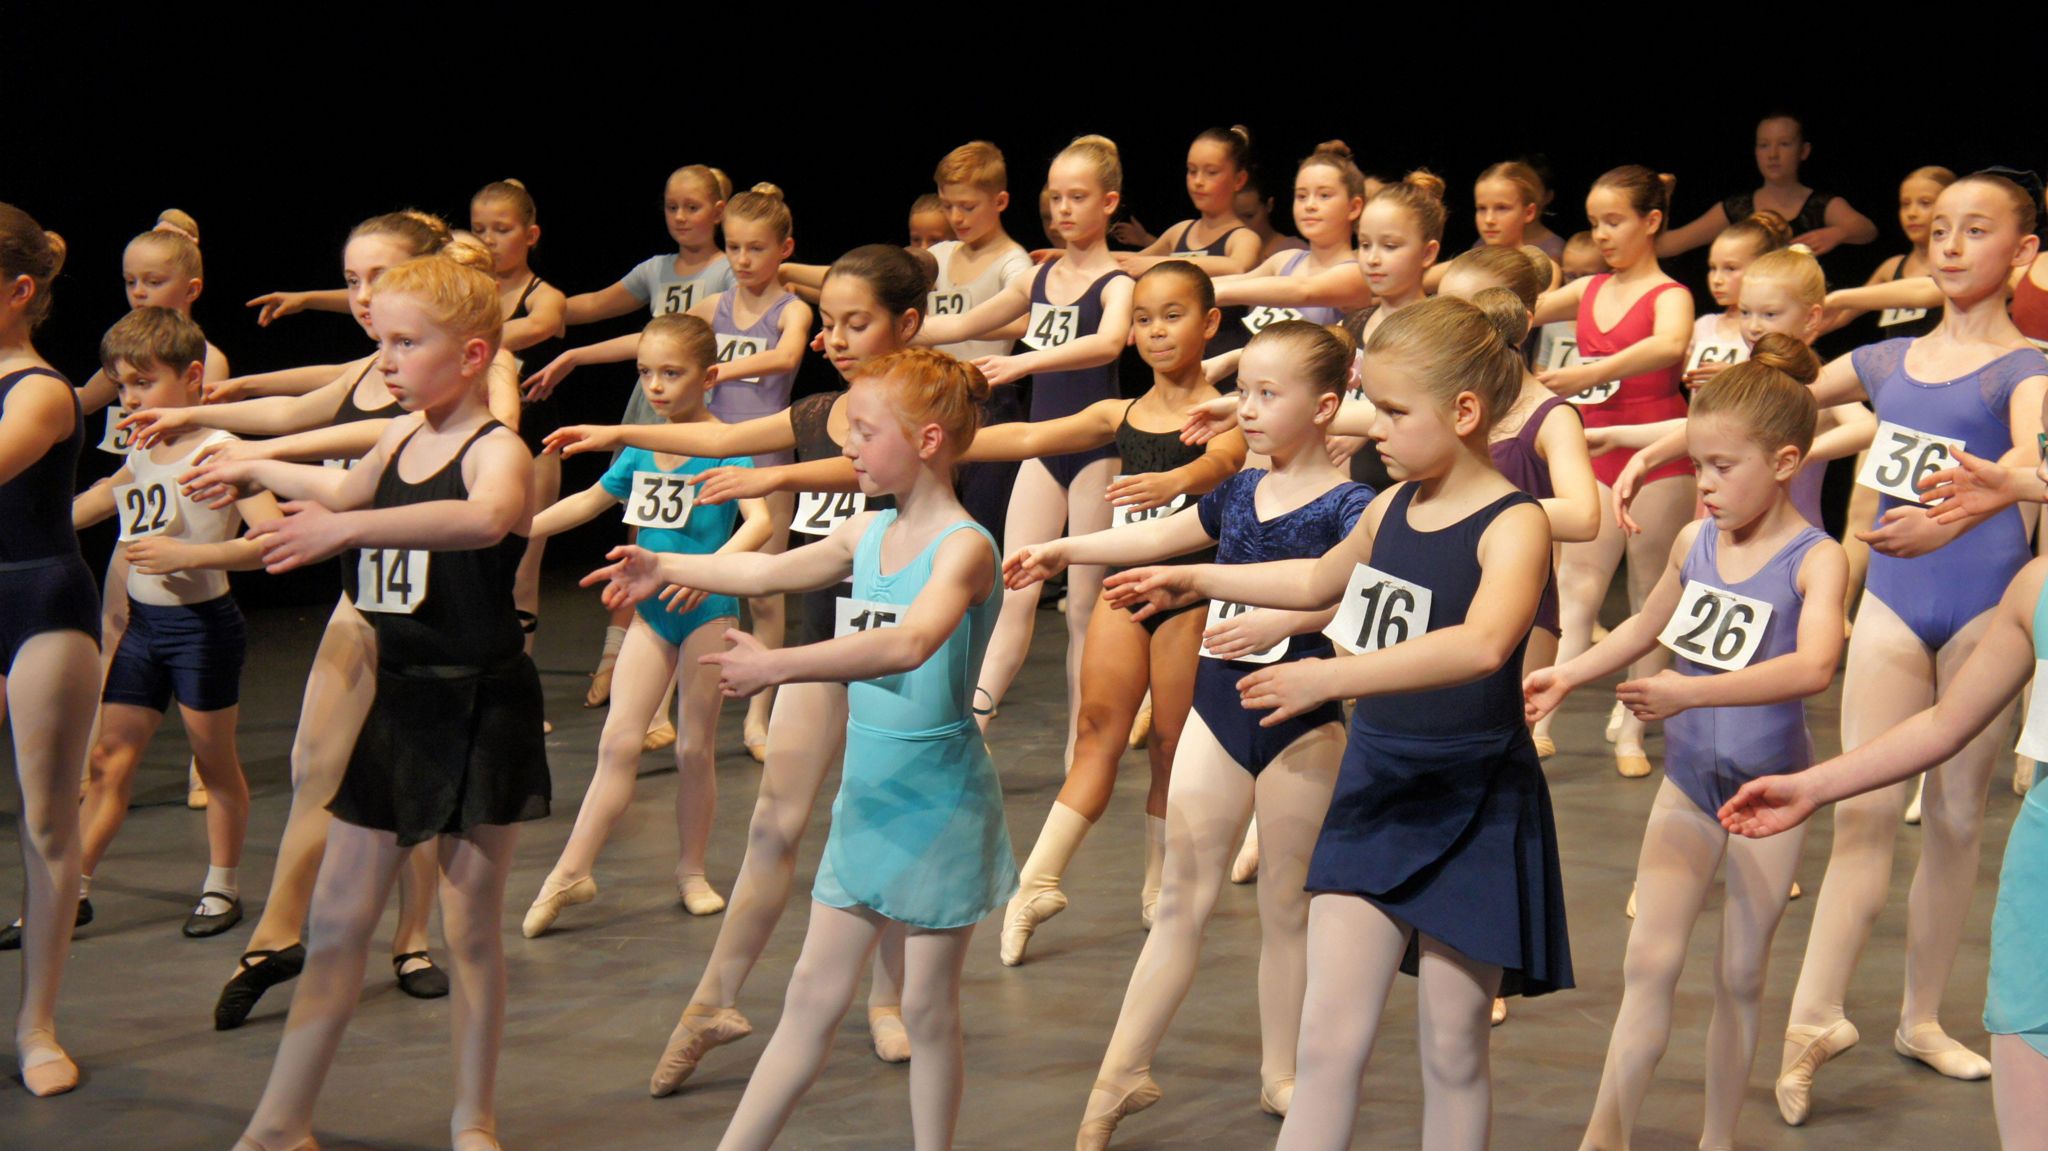 Auditionees in a ballet pose